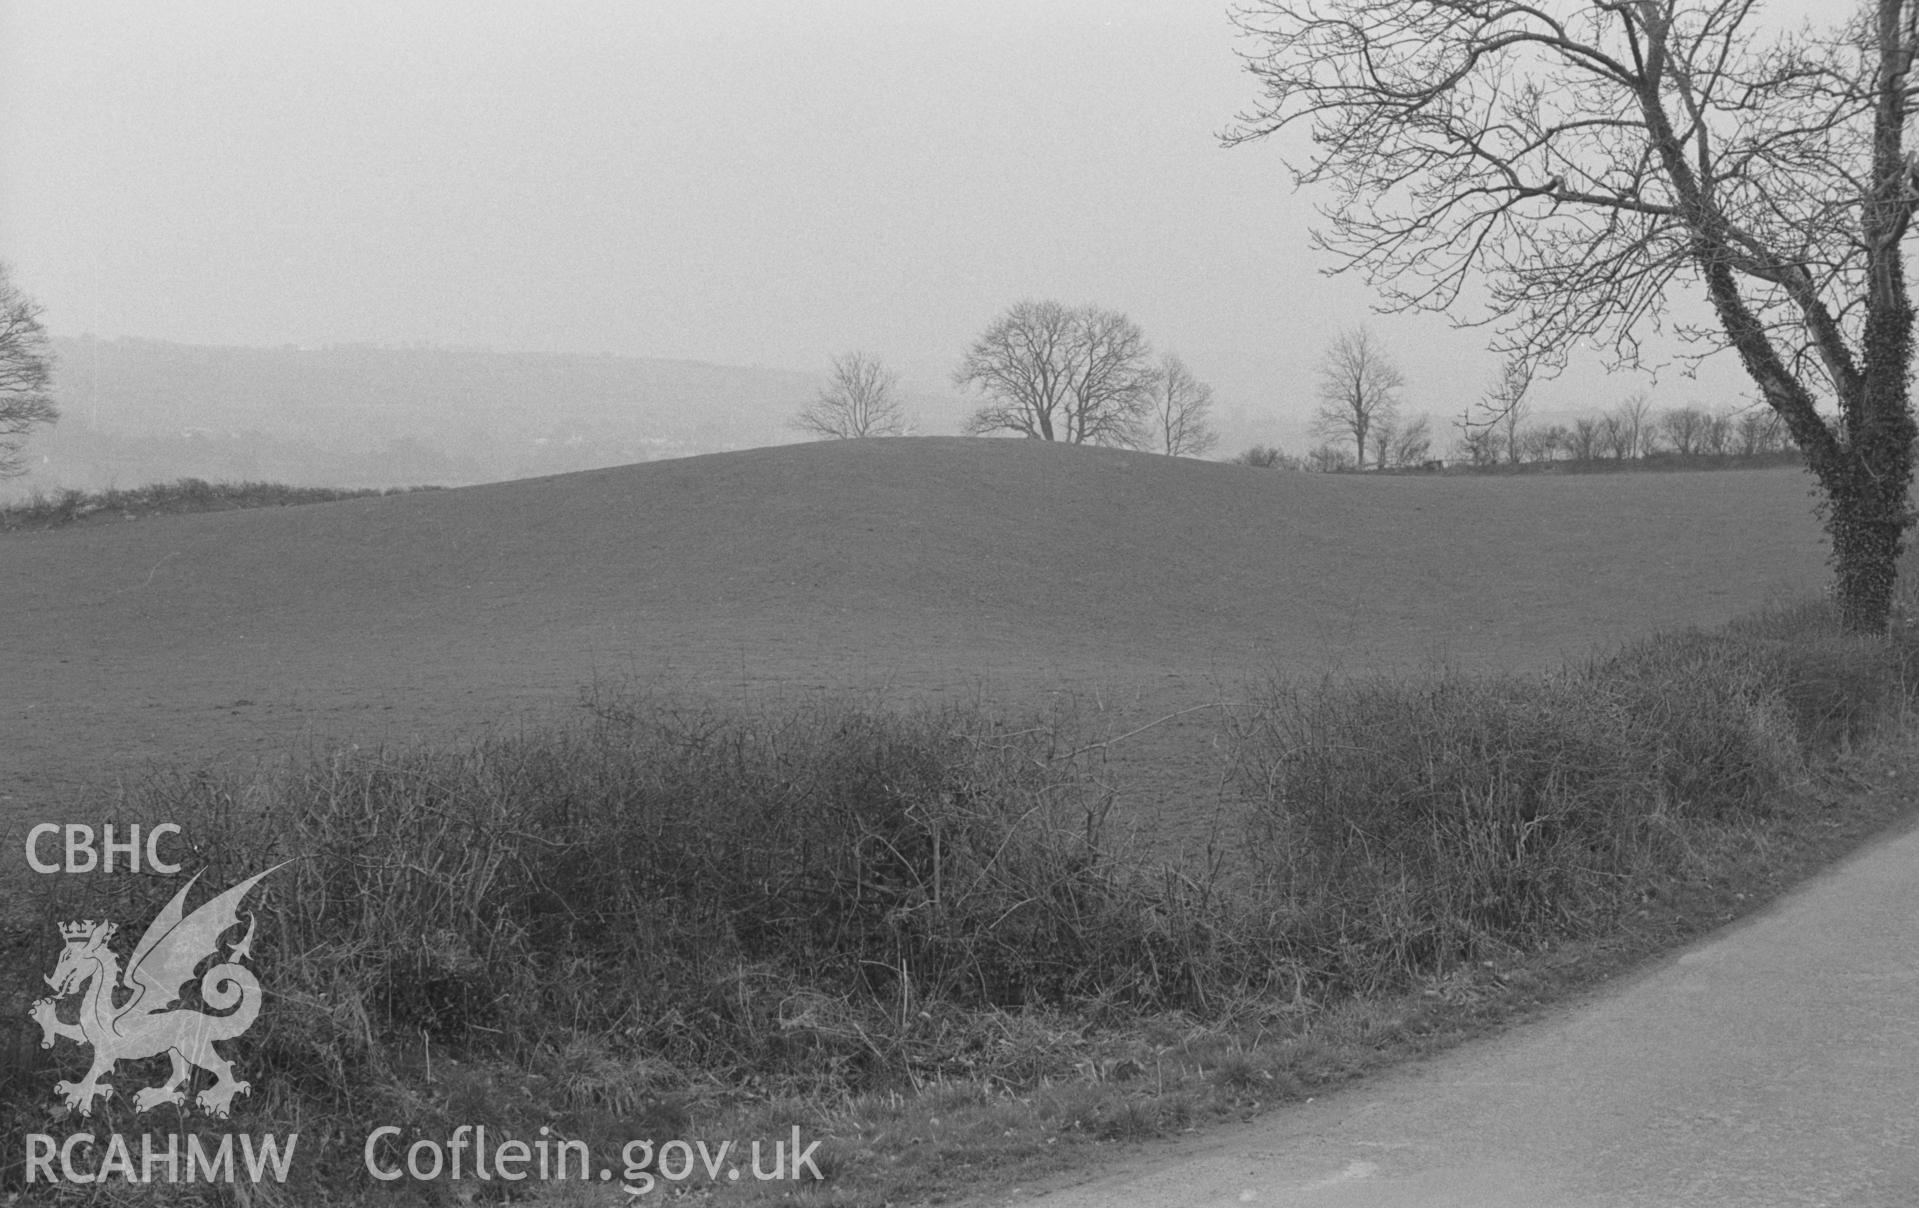 Digital copy of a black and white negative showing 'Castell Bugad,' a natural formation, in Teifi valley 1km east of Lampeter. Photographed in March 1964 by Arthur O. Chater from Grid Reference SN 5911 4838, looking south.